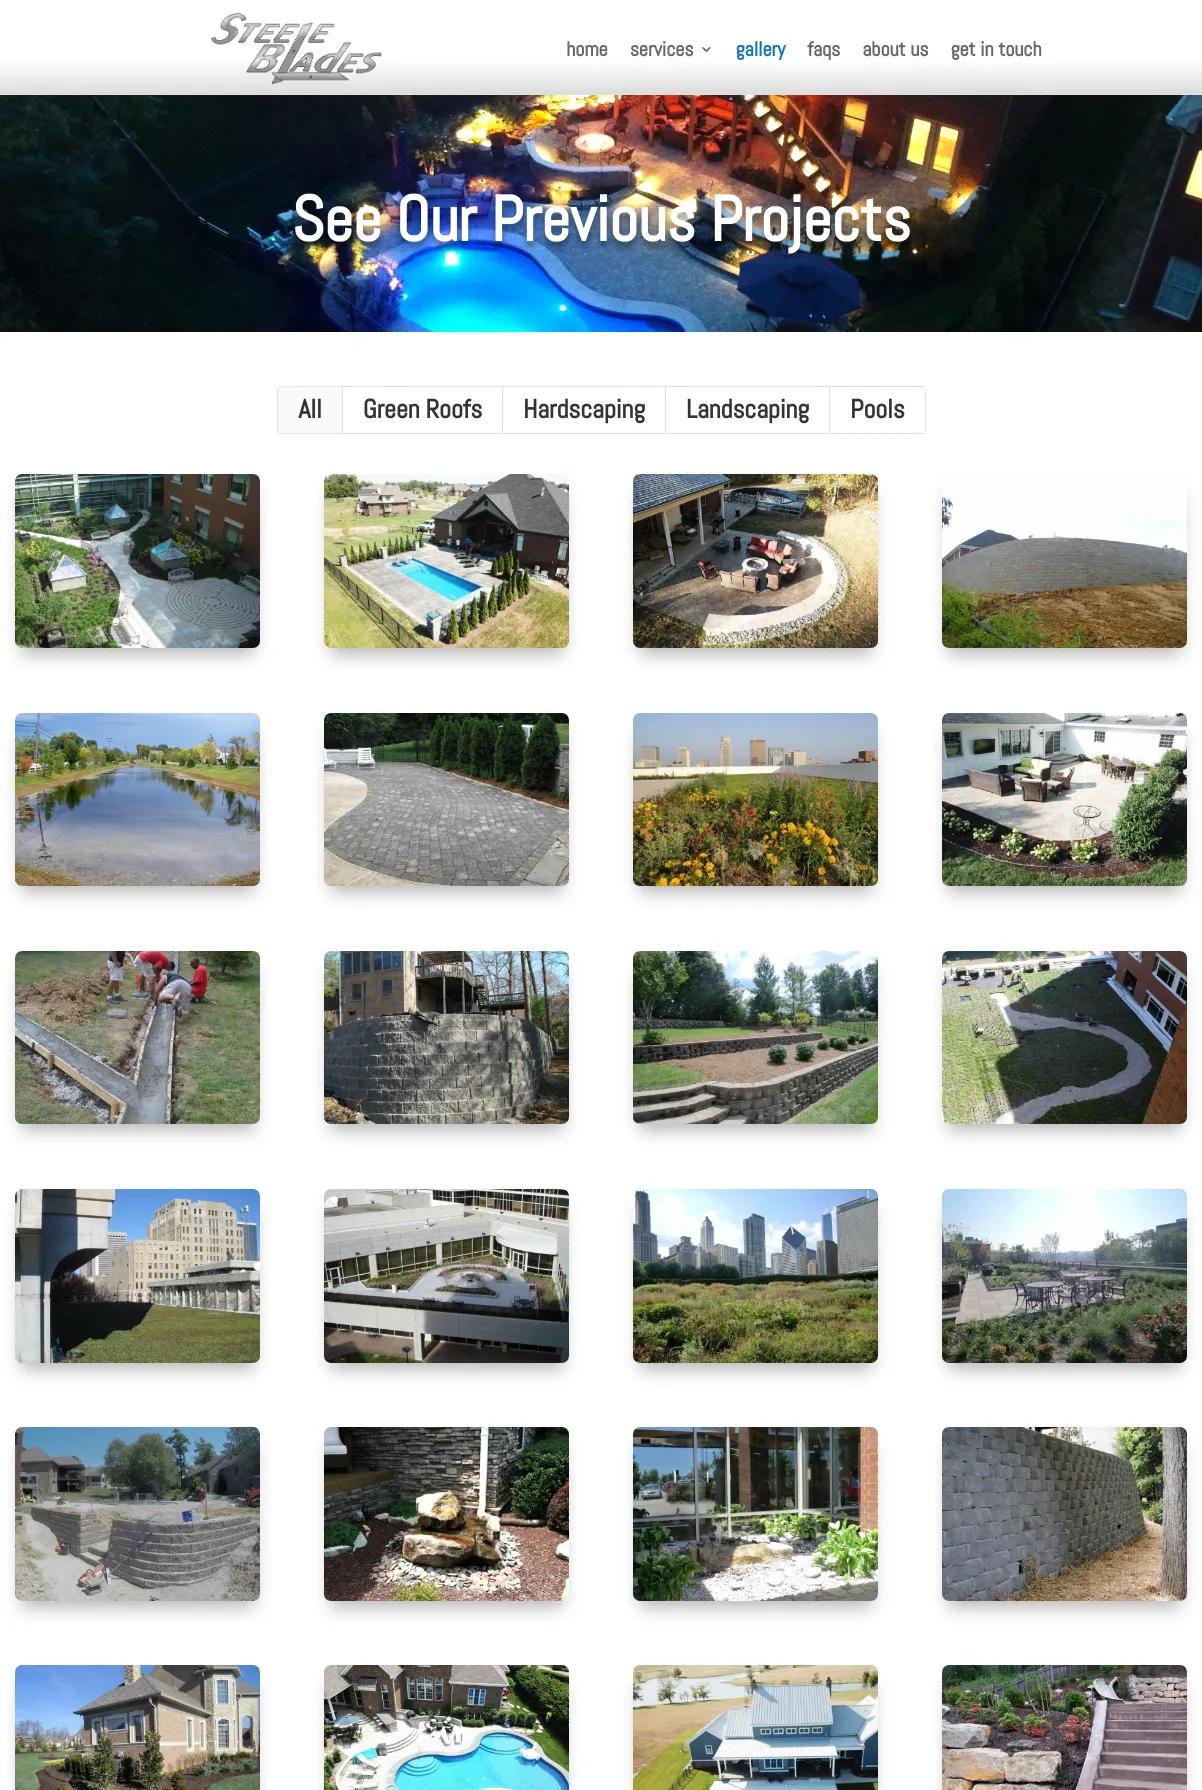 Screenshot 3 of Steele Blades (Example Squarespace Lawn Care Website)